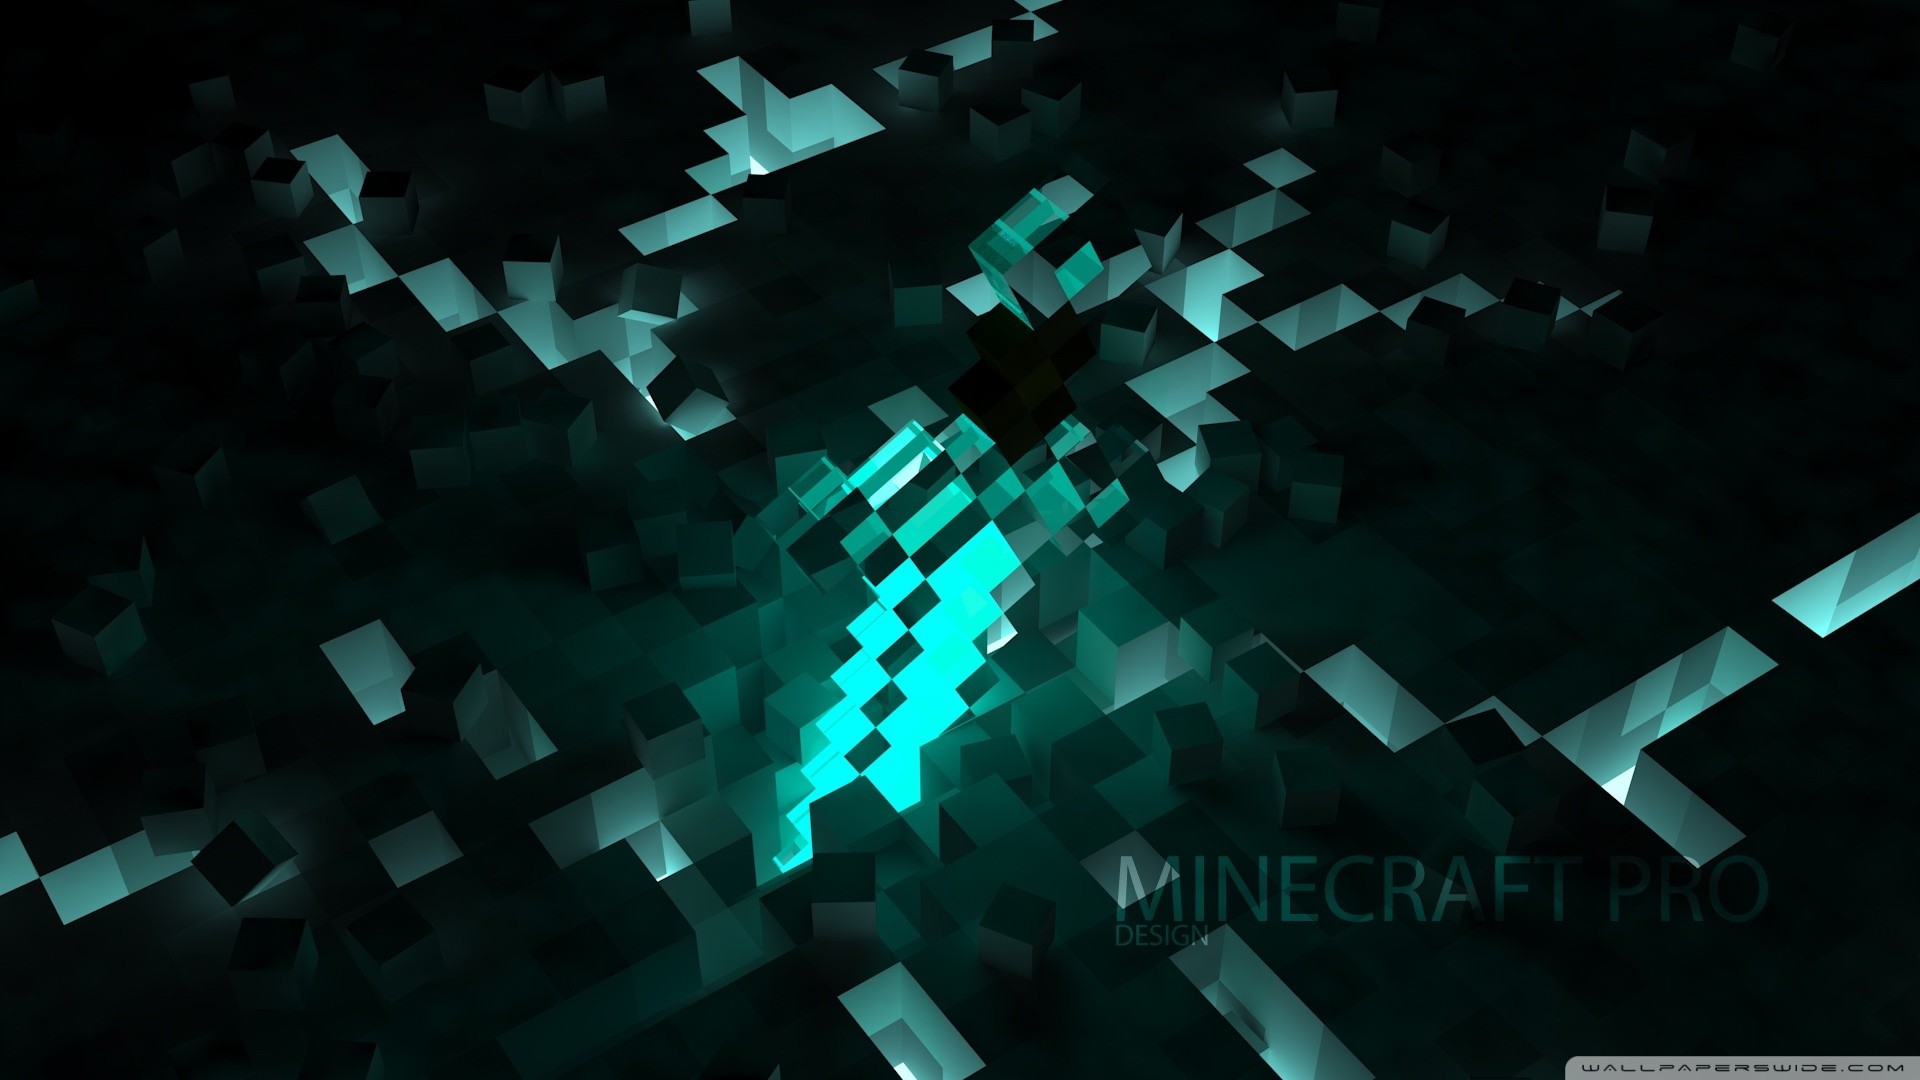 Hd Herobrine Wallpapers 1920 1080 Minecraft Wallpapers Hd 1080p 41 Wallpapers Adorable 1920x1080